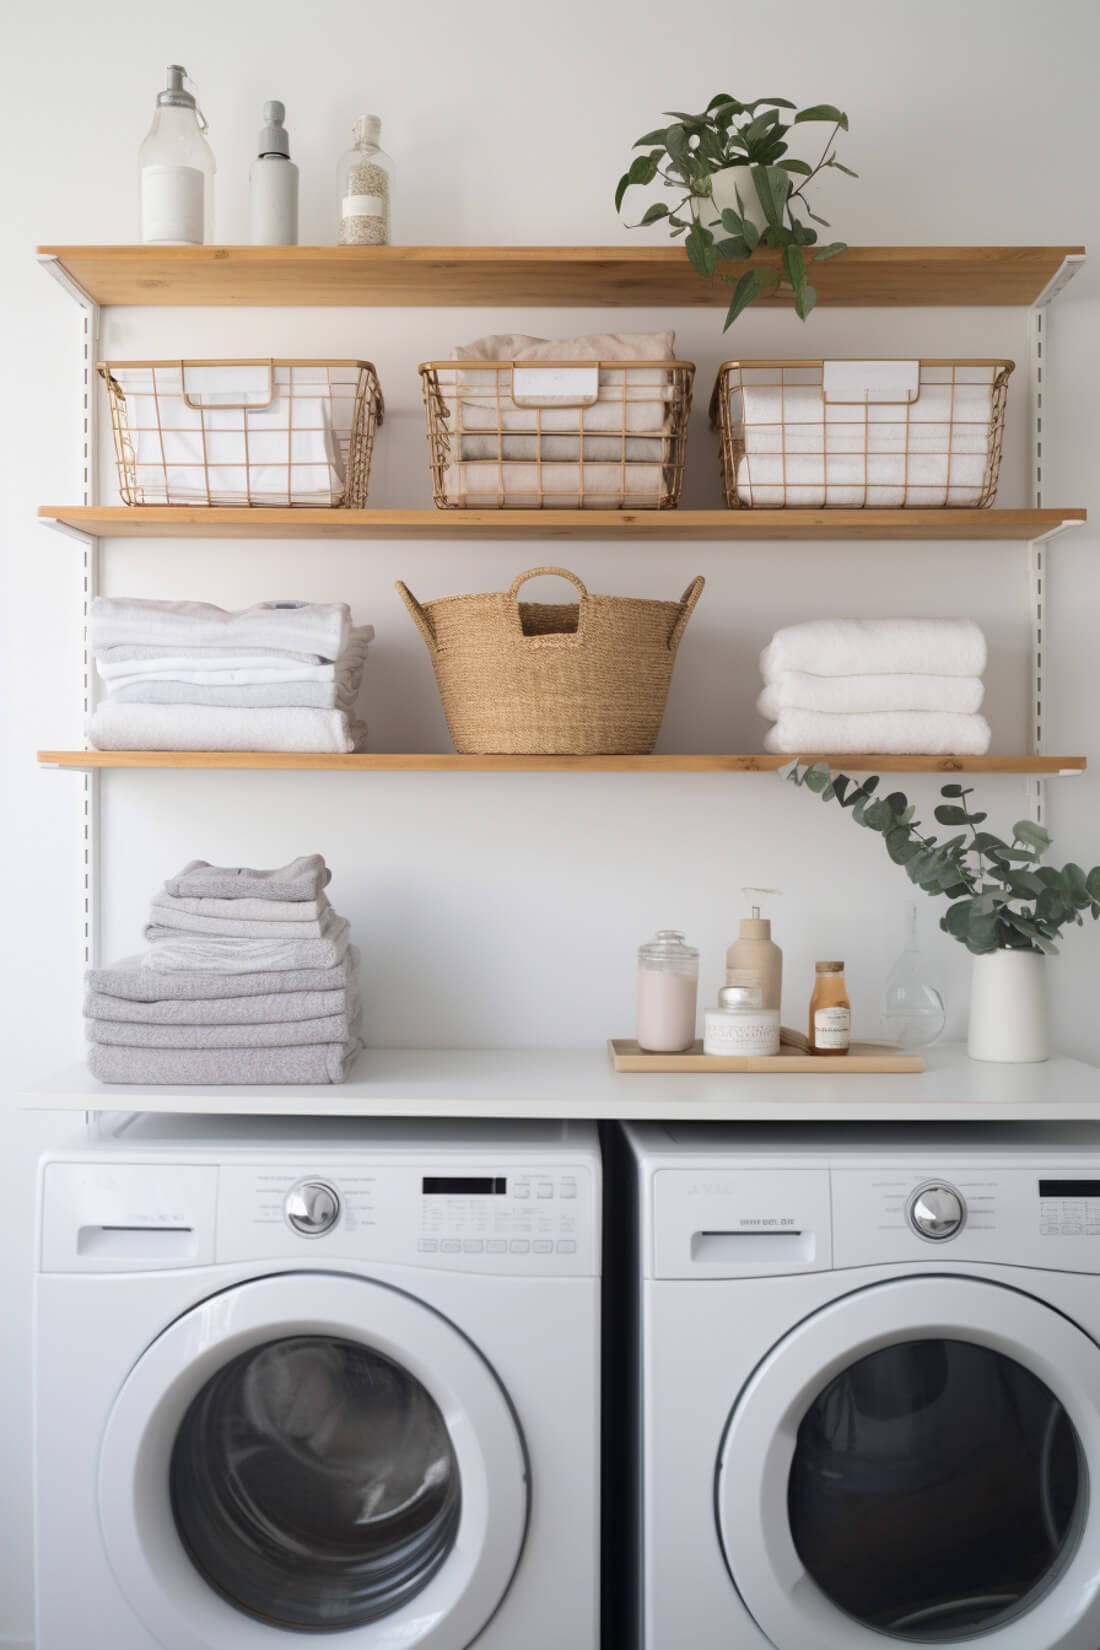 wire and wood laundry basket shelf ideas with metal baskets and towels, adjustable wire shelves